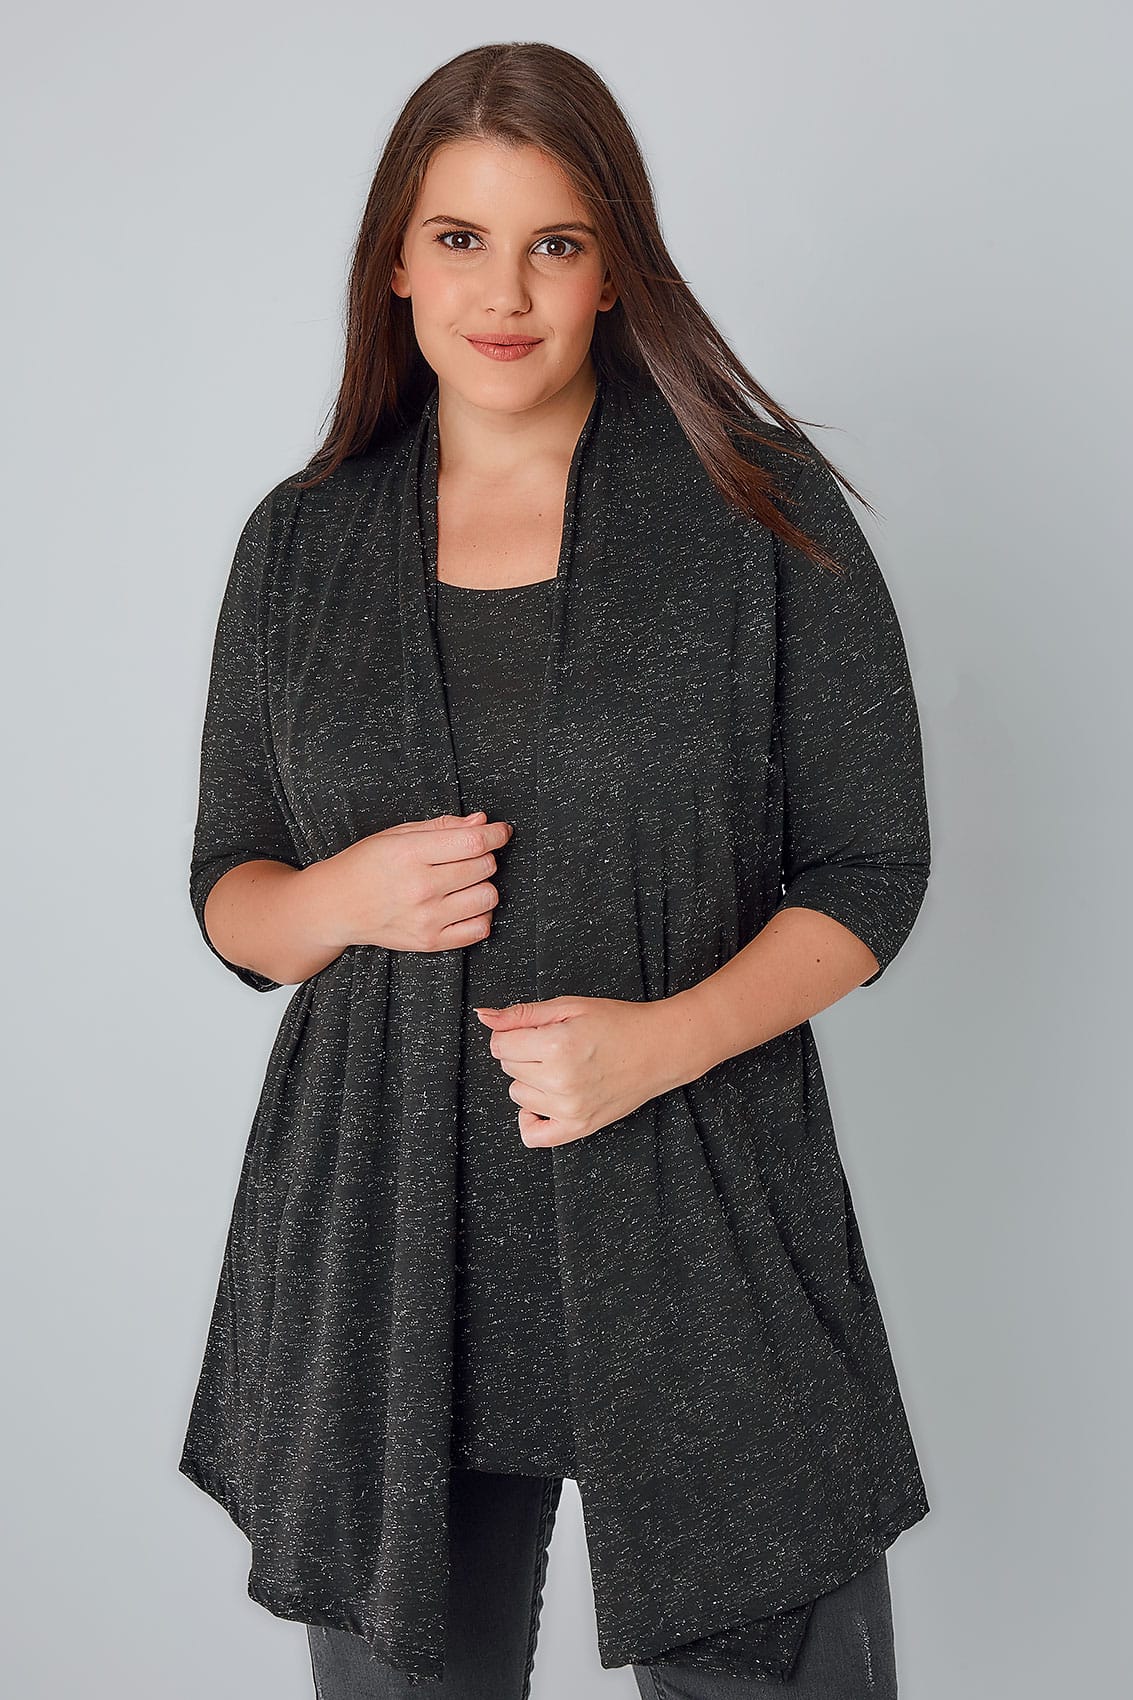 Black Sparkly 2 In 1 Top & Cardigan, Plus size 16 to 36